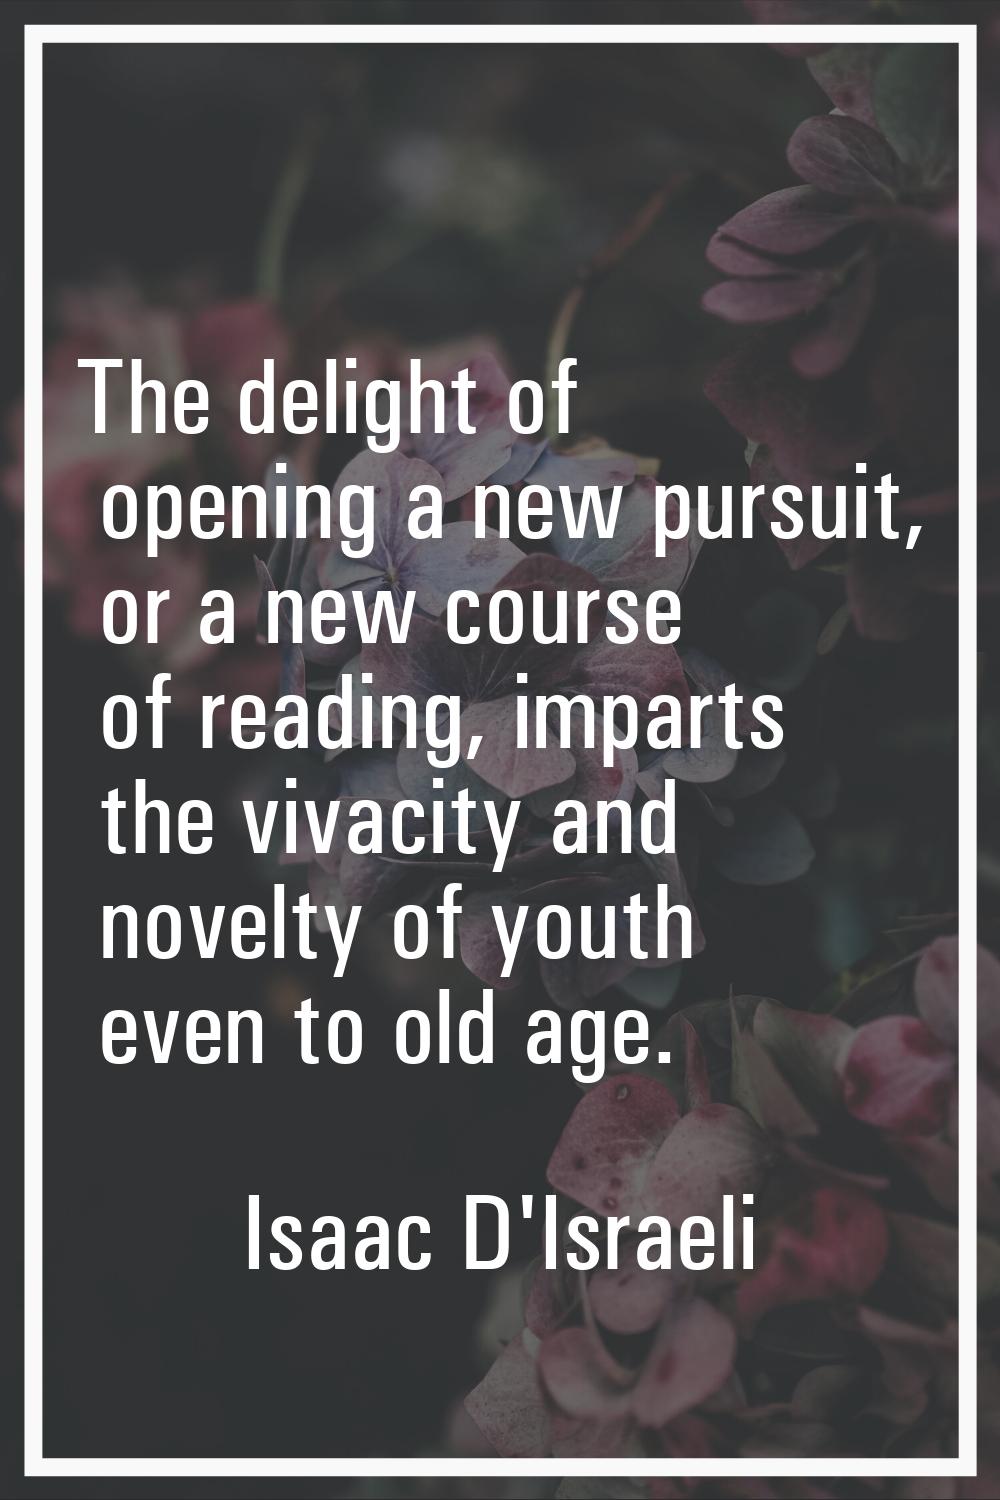 The delight of opening a new pursuit, or a new course of reading, imparts the vivacity and novelty 